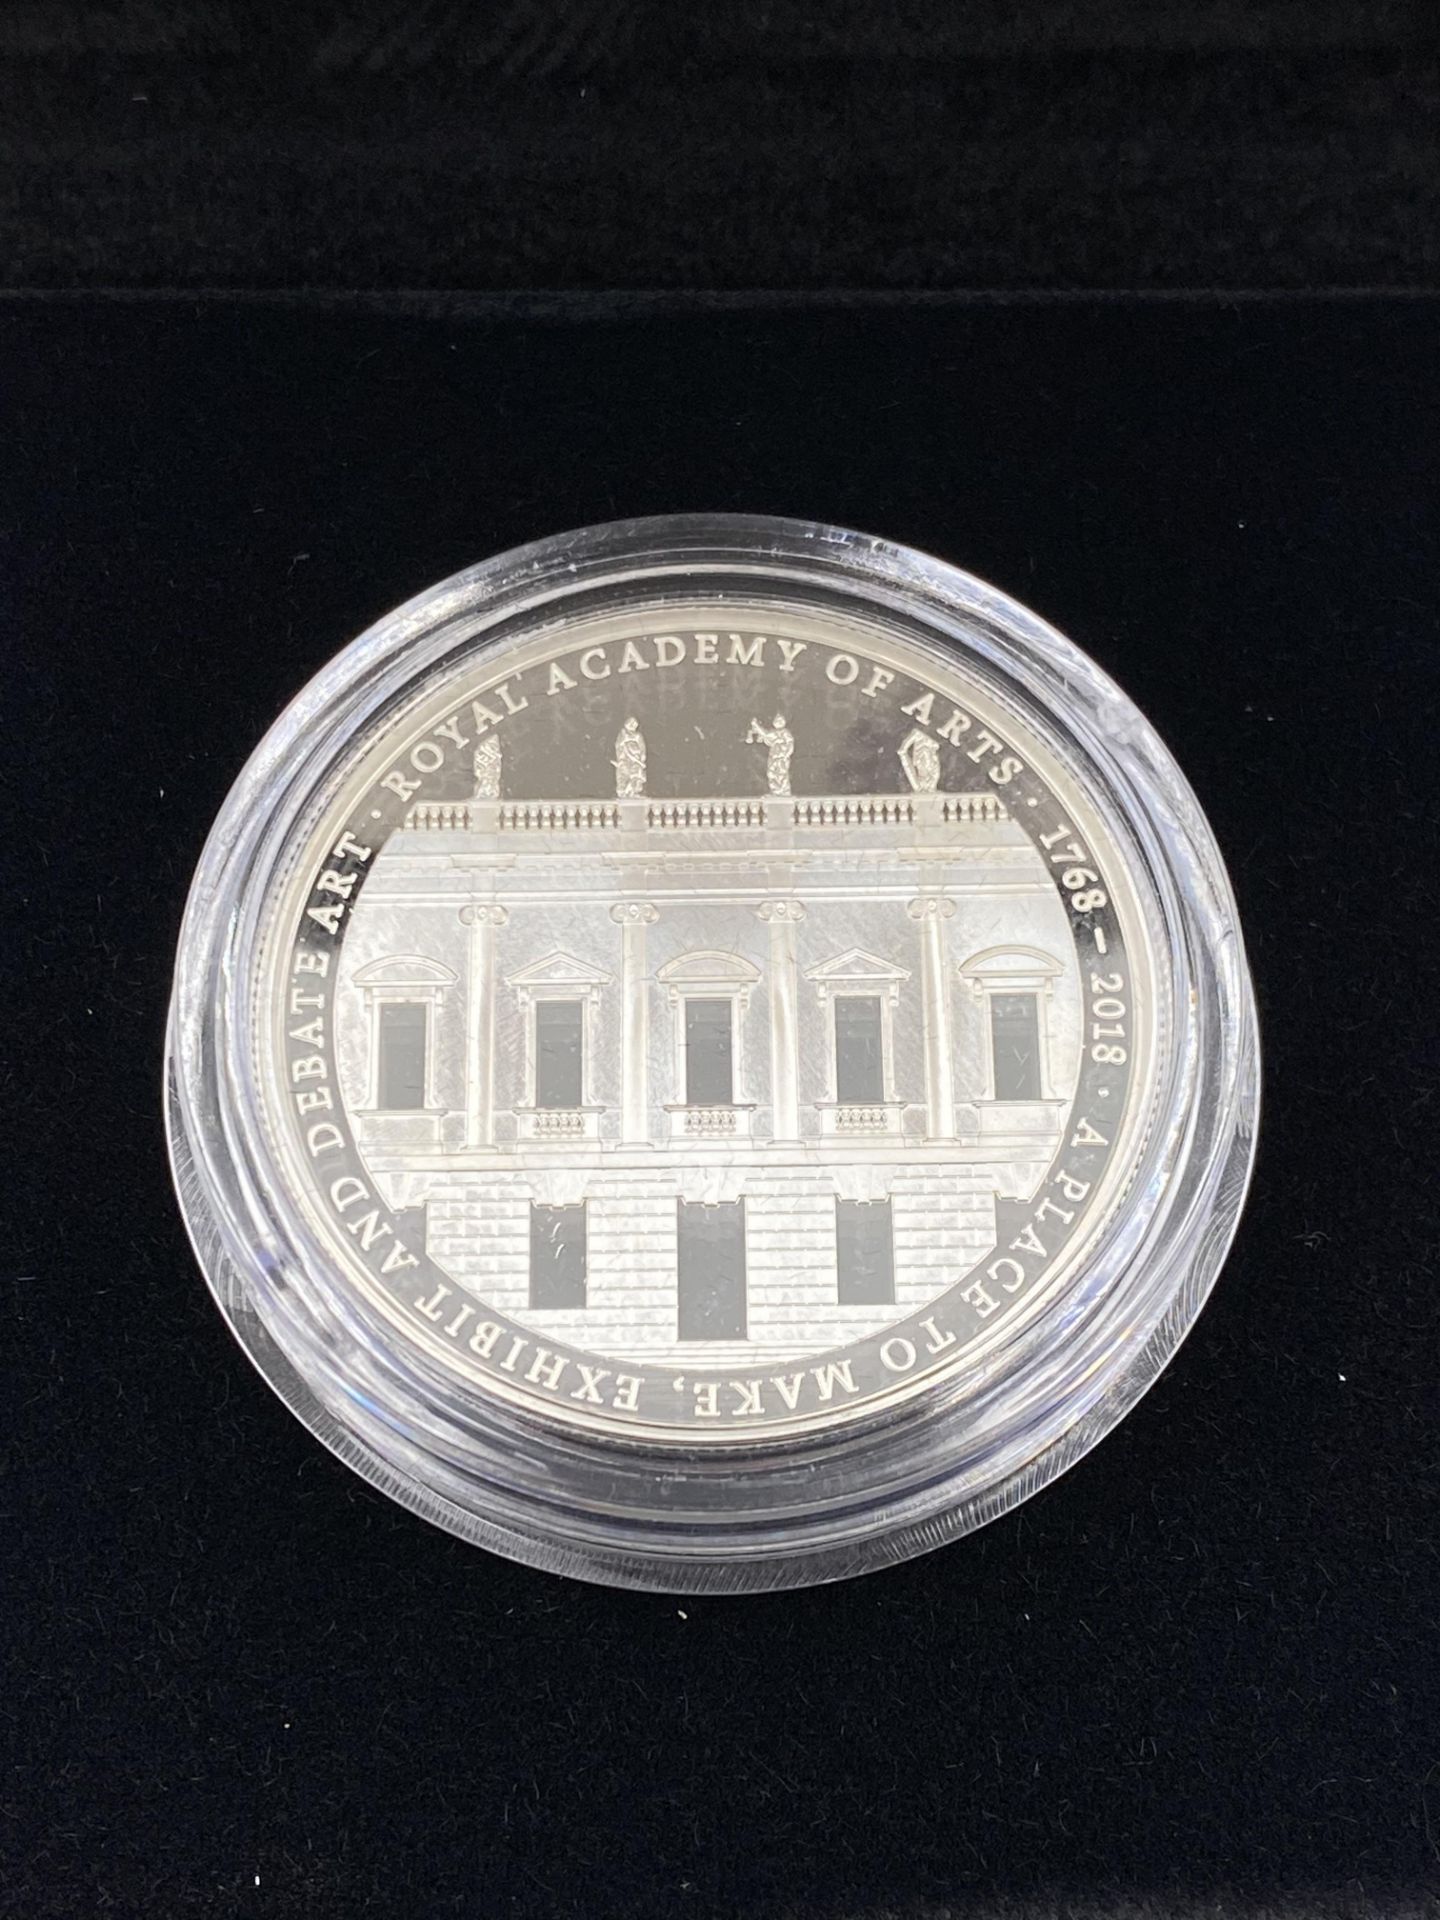 Royal Mint 250th Anniversary of the Royal Academy of Arts 2018 £5 silver proof coin - Image 4 of 4